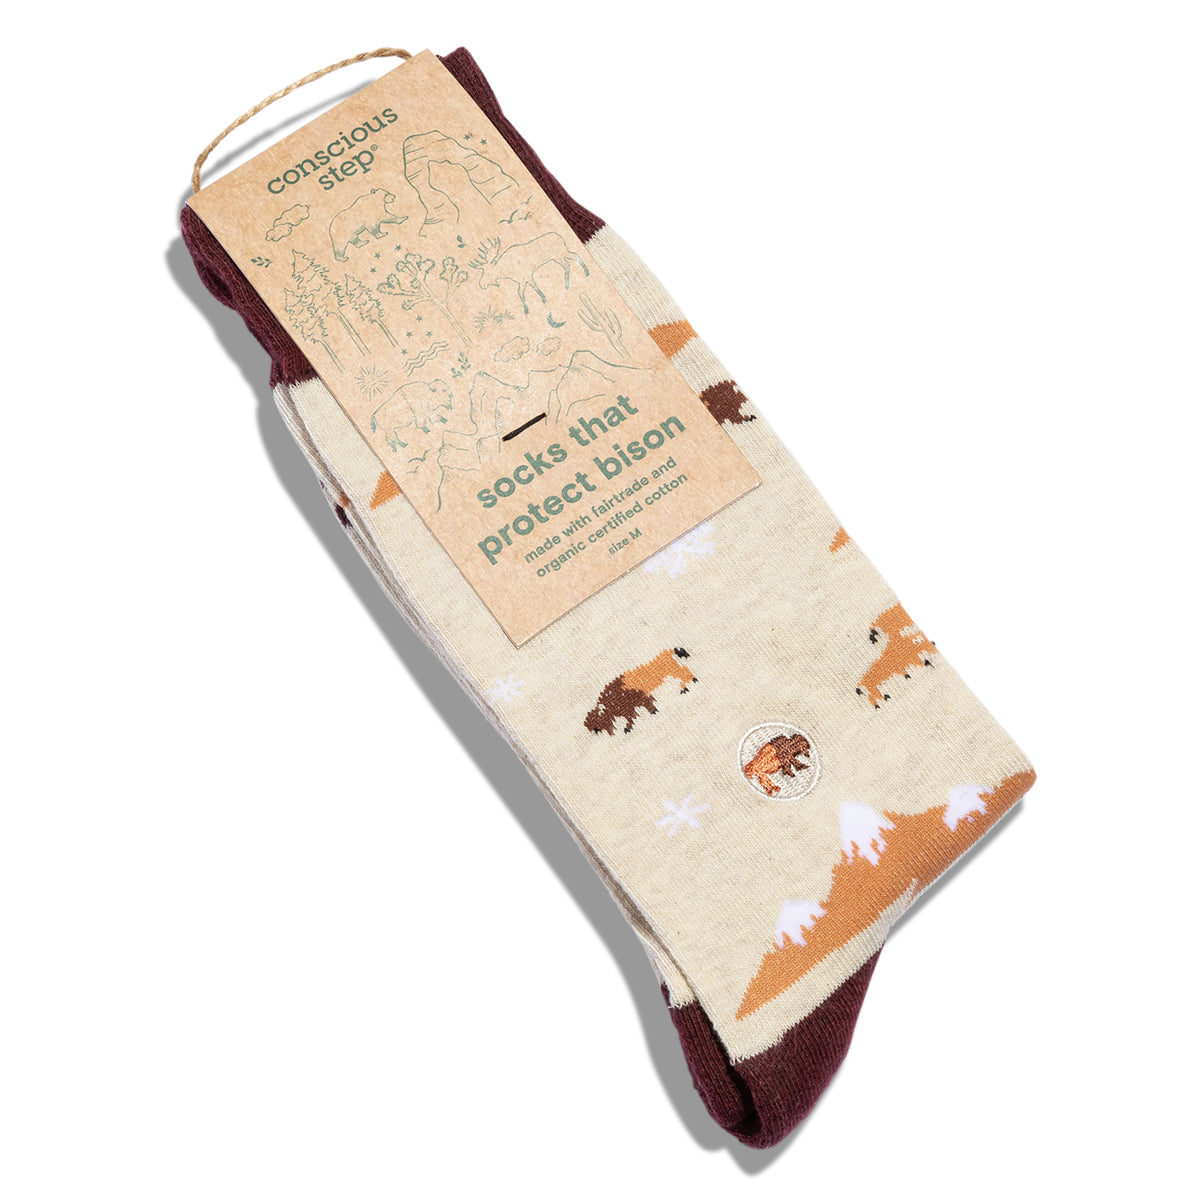 Socks that Protect Bison